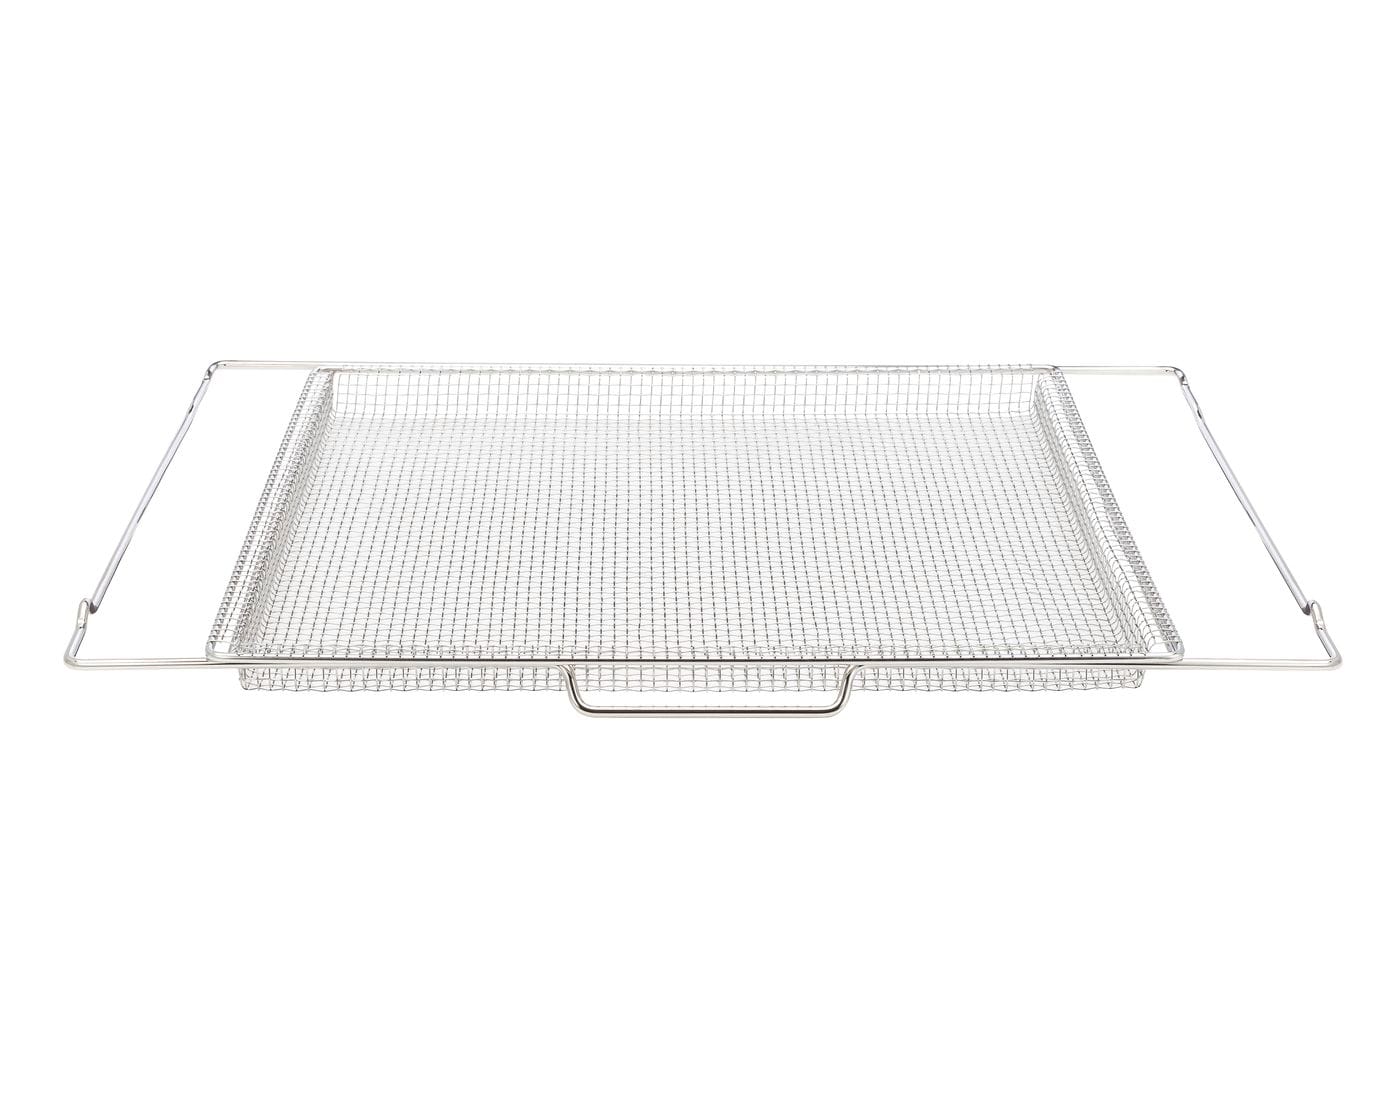 Stainless Steel Air Fry Tray Accessory for 30” Ranges Home